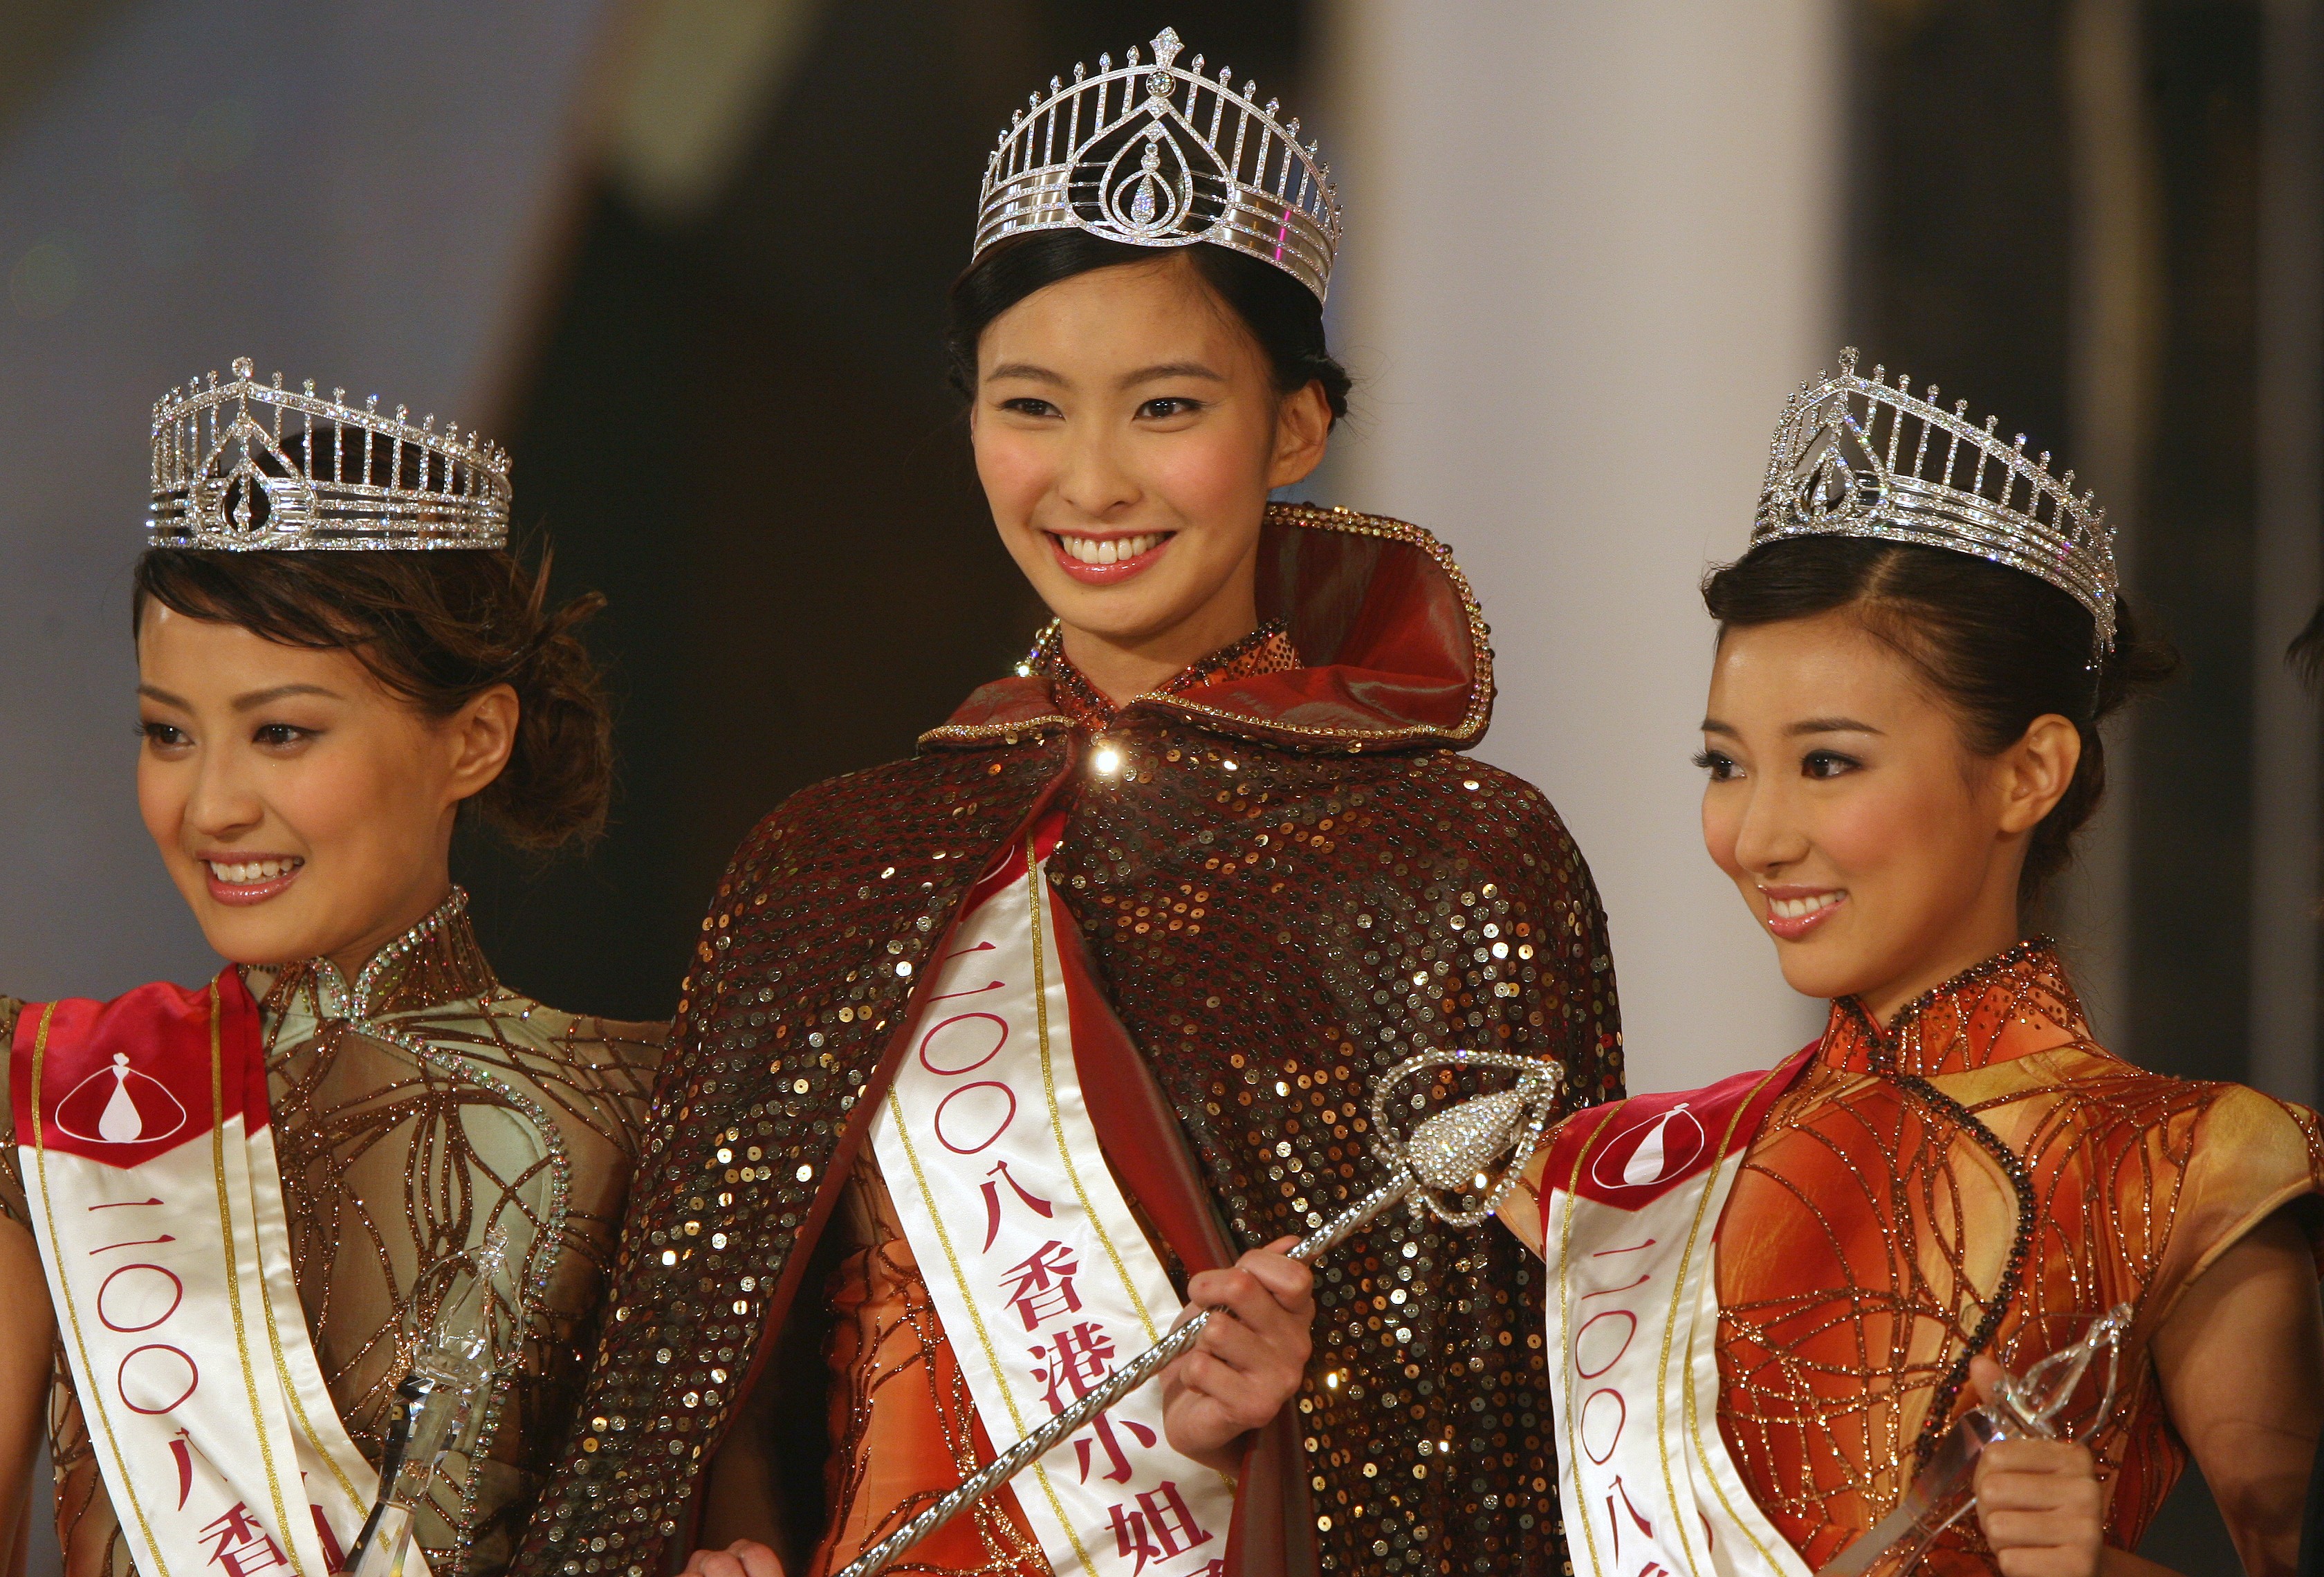 The Miss Hong Kong Pageant 2008 winner, Edelweiss Cheung (centre), stands next to Skye Chan (left) who would later go on to takeover her duties, and second runner-up Samantha Ko (right). Photo: Oliver Tsang